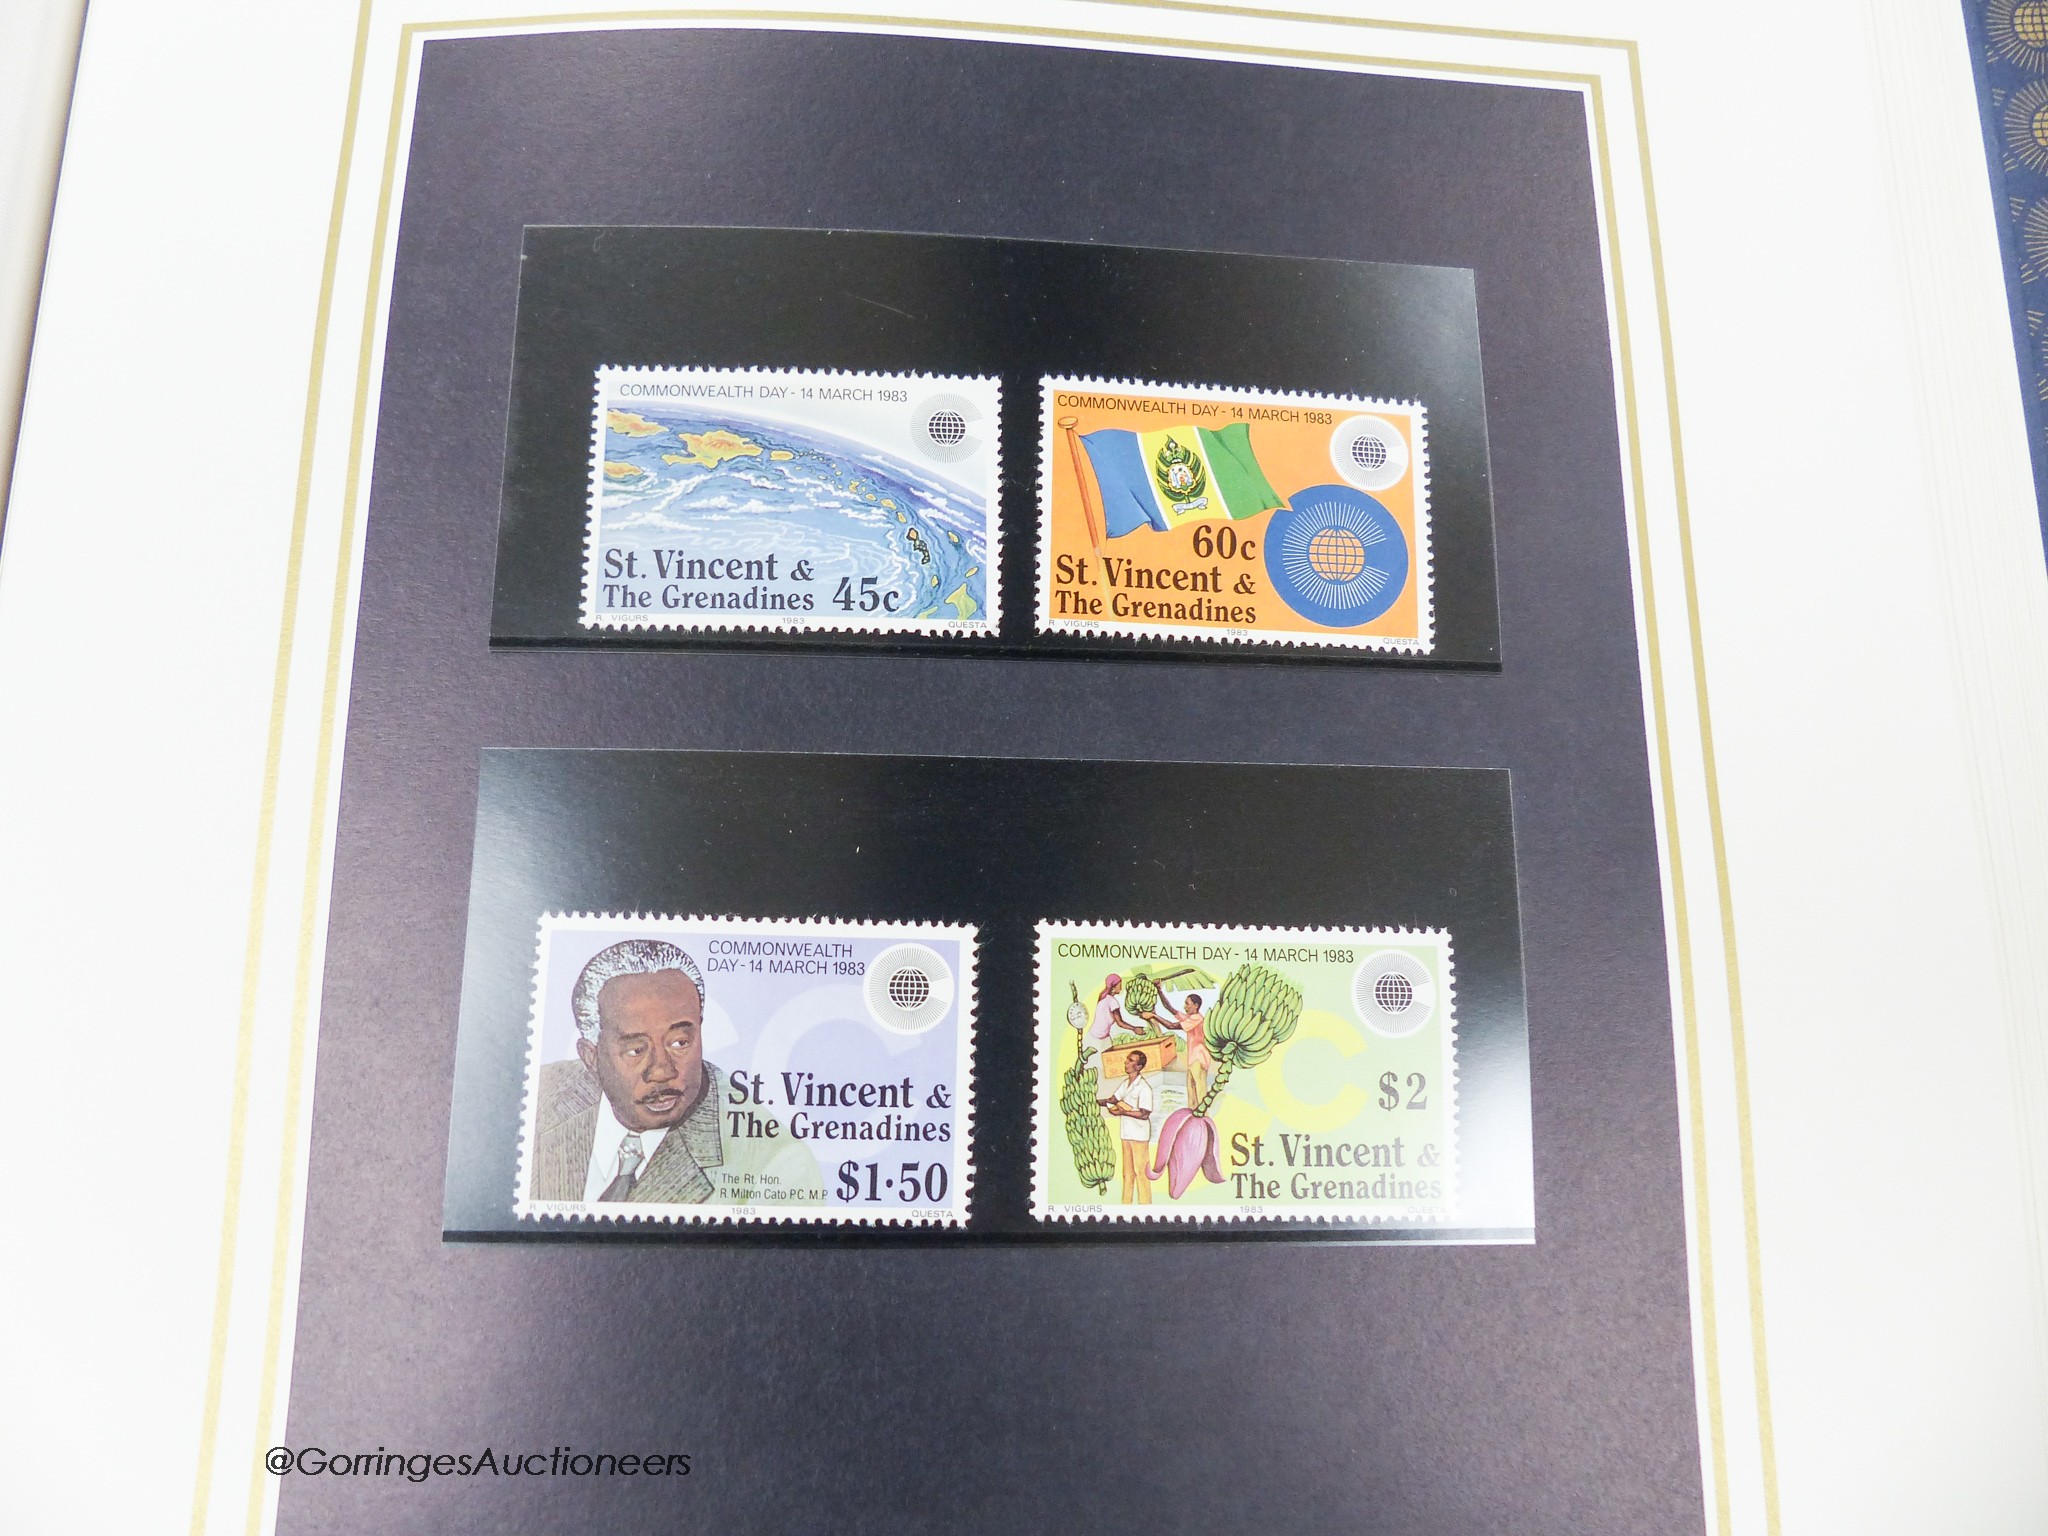 World stamps in five albums with British Commonwealth, China, India 1924 Everest postcard used (one box)